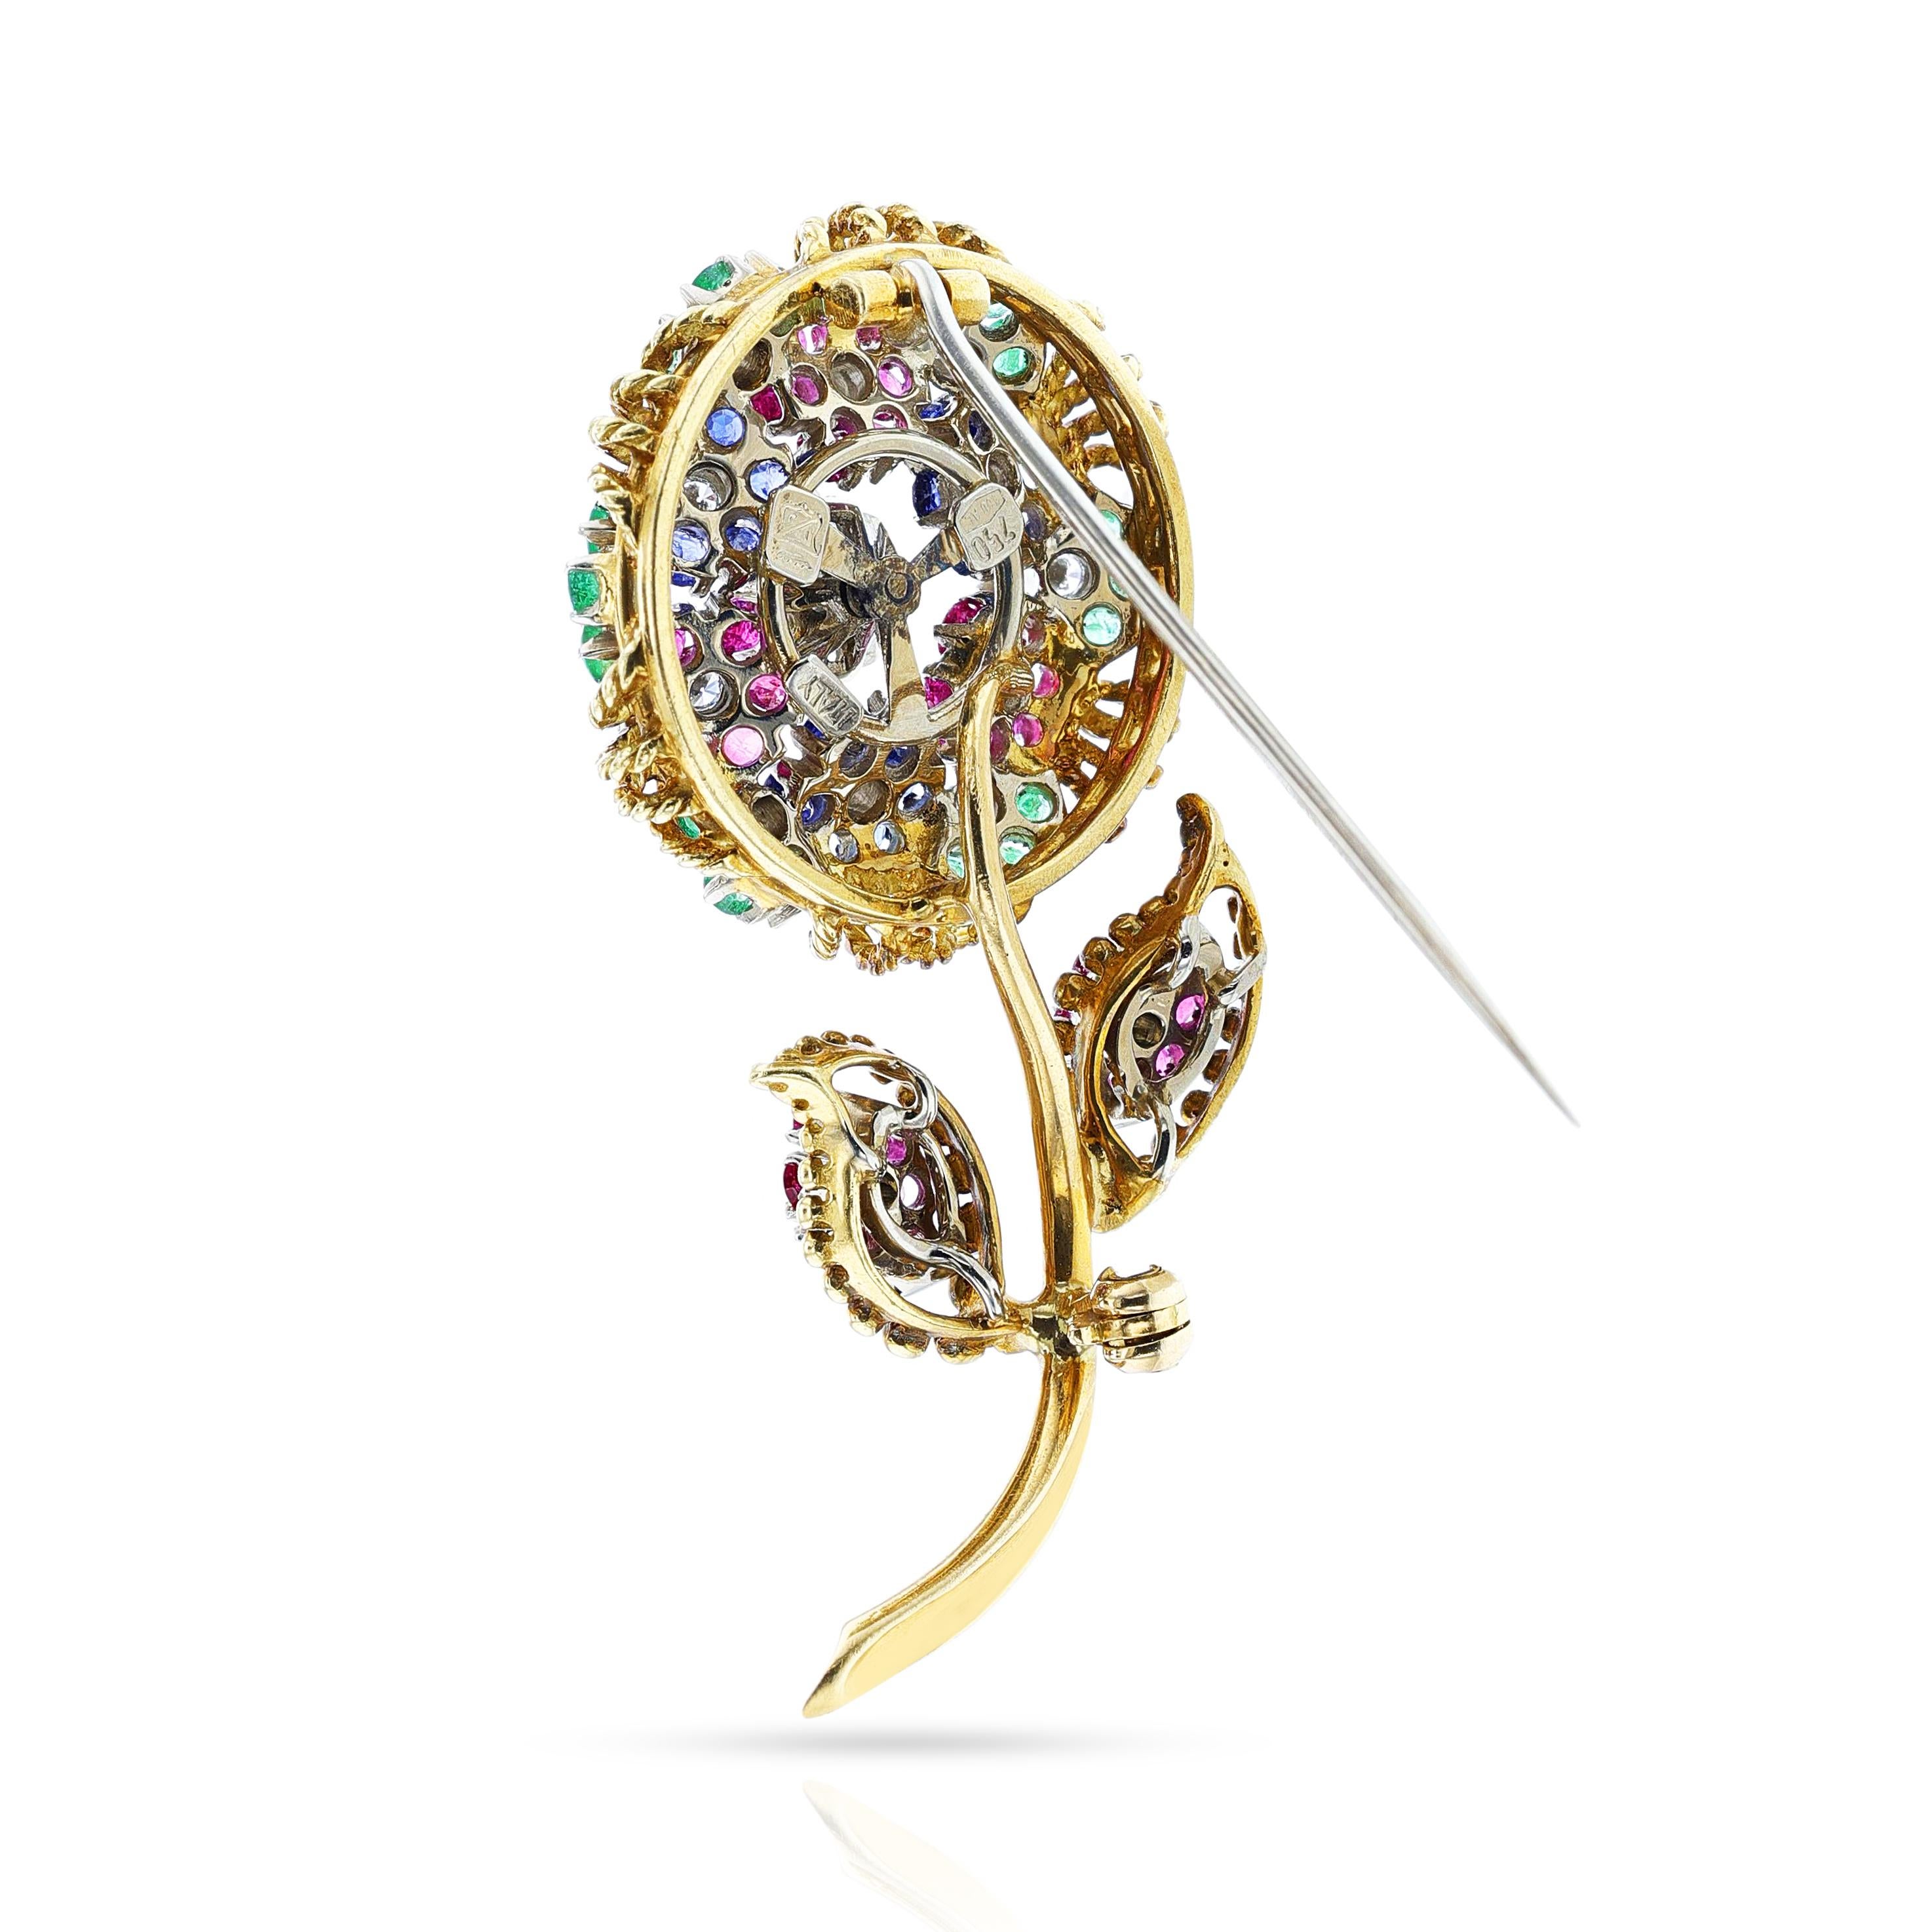 Ruby, Emerald, Sapphire and Diamond Floral Brooch, 18k In Excellent Condition For Sale In New York, NY